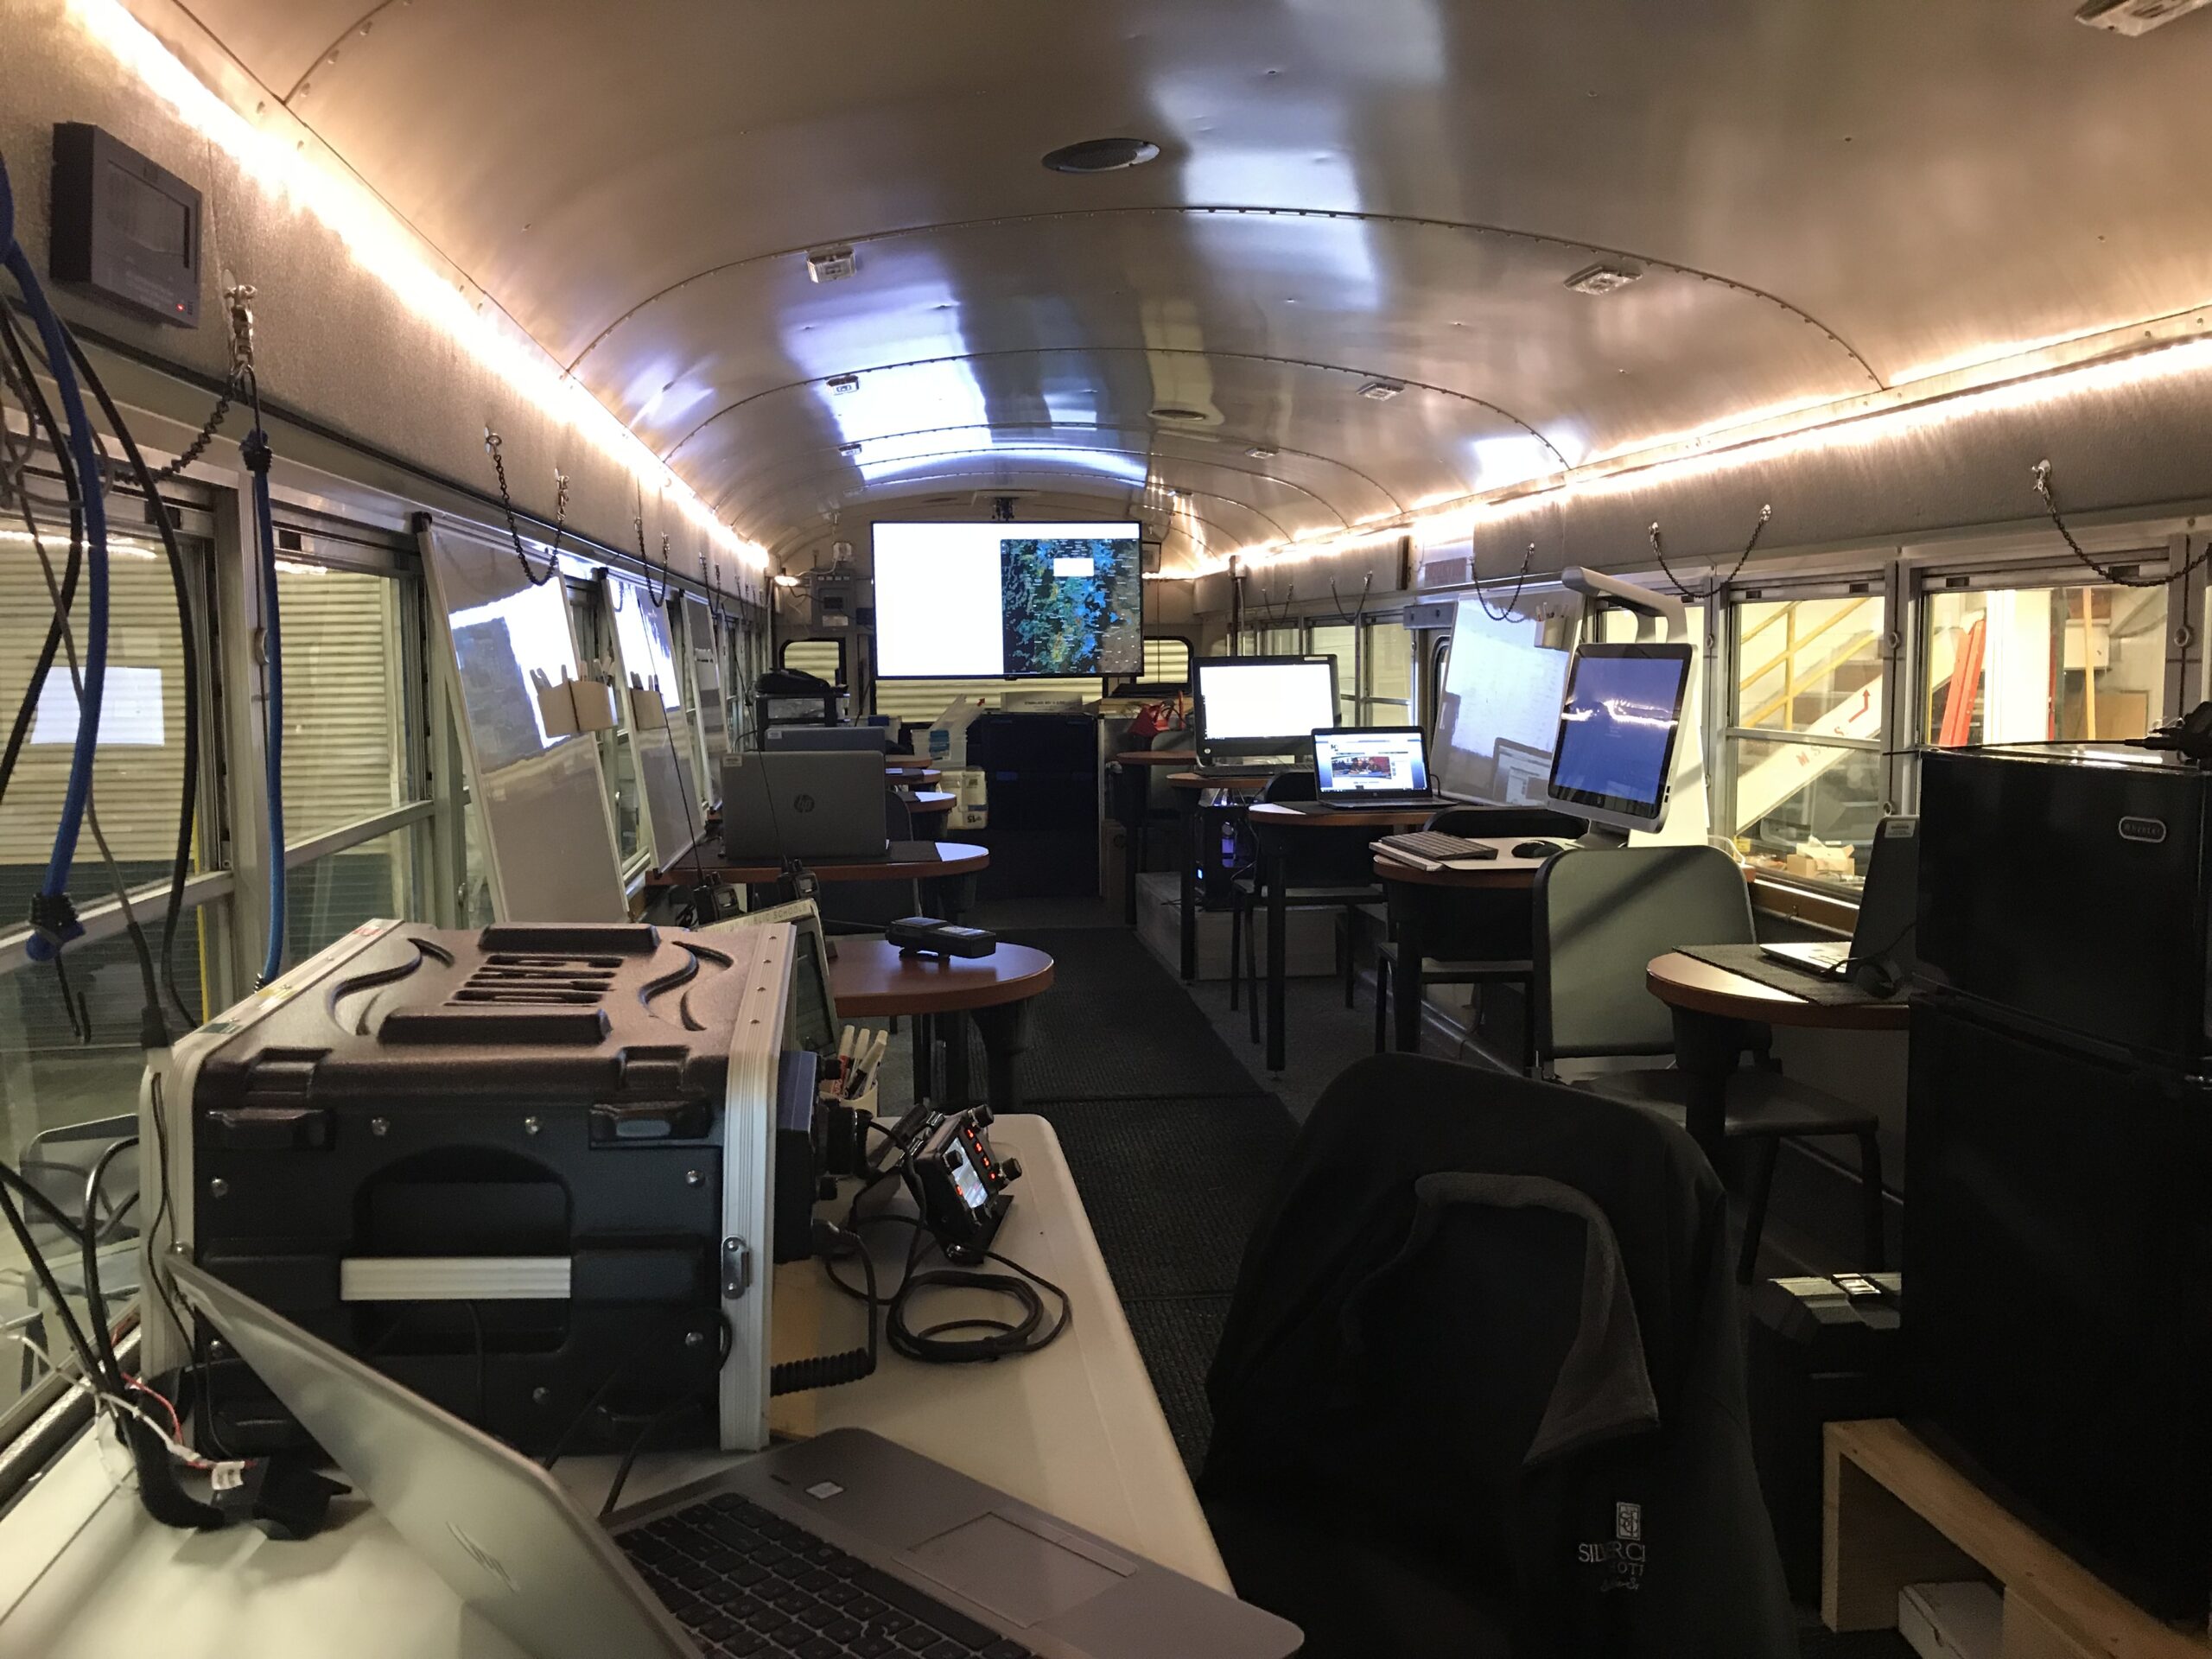 When used in an emergency, there is space for 12 to work inside the bus. As a mobile STEAM lab, there's room for 15 kids to learn.